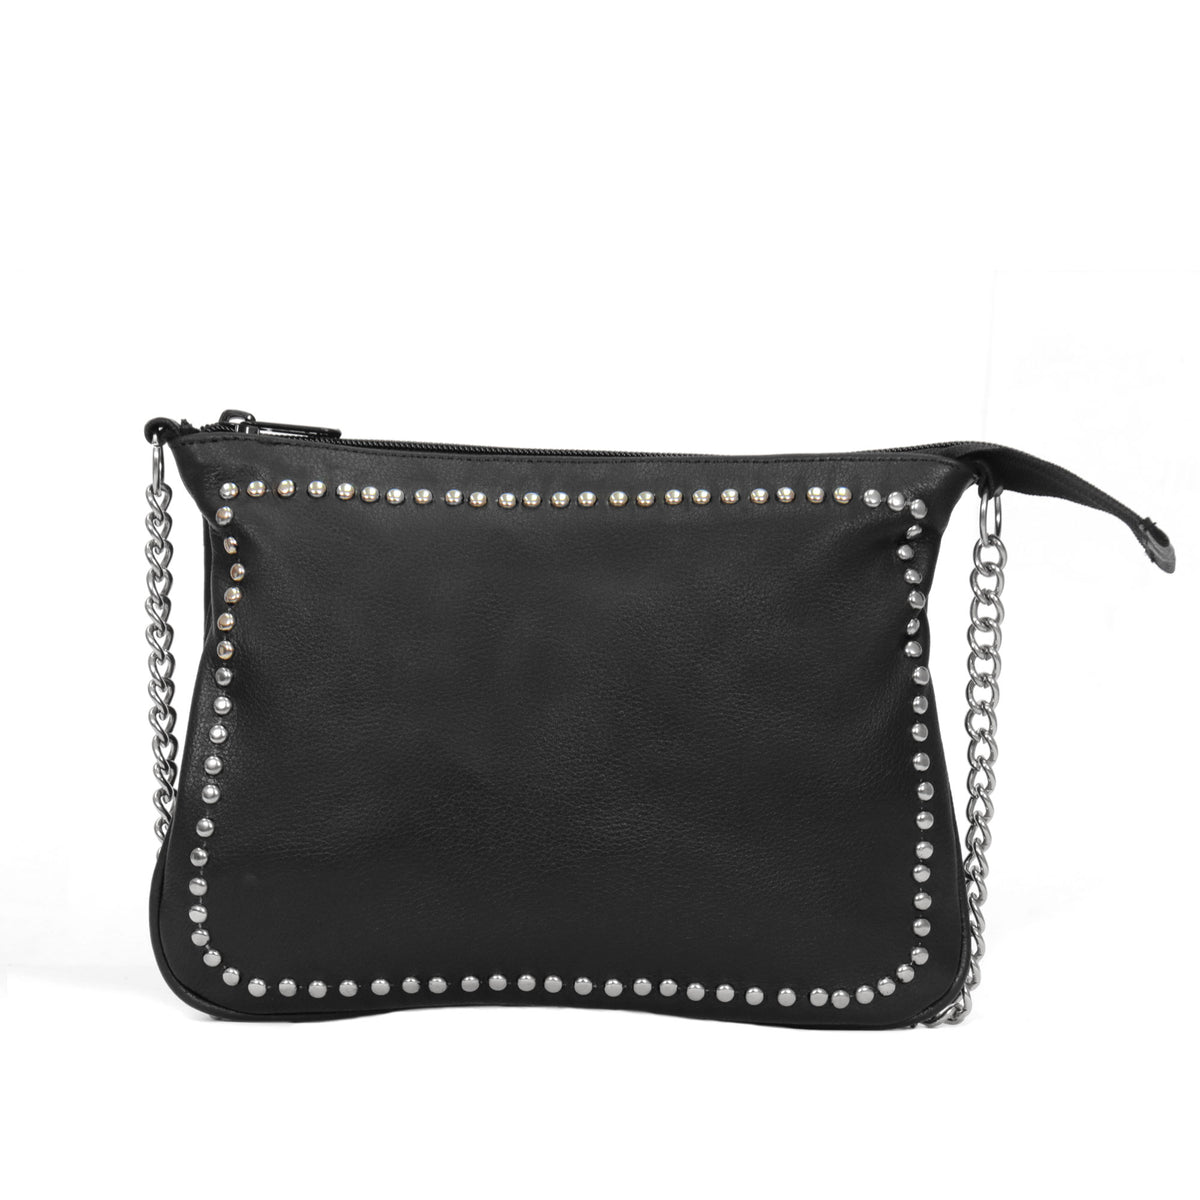 Hot Leathers Concealed Carry Purse